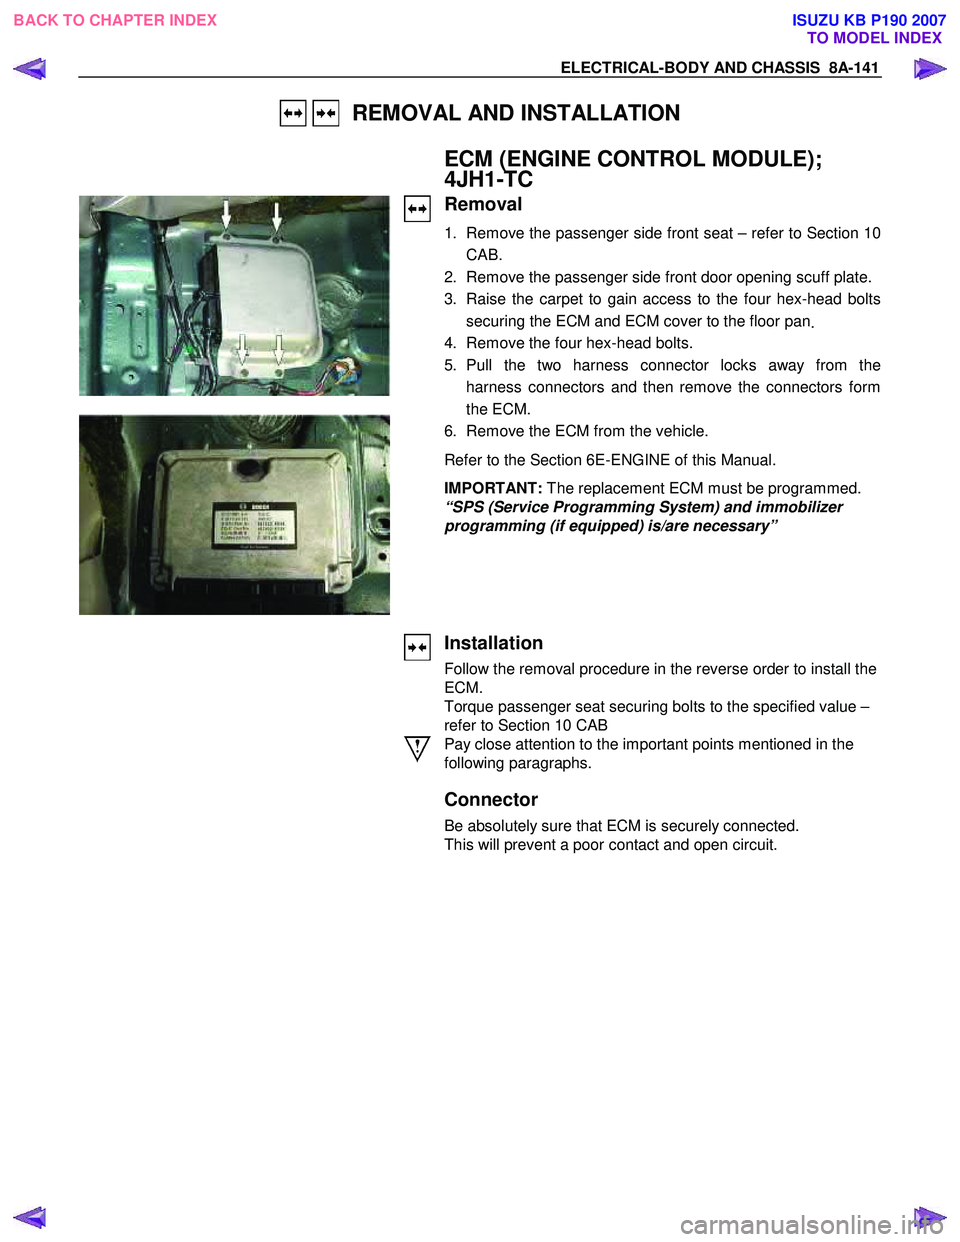 ISUZU KB P190 2007  Workshop Repair Manual ELECTRICAL-BODY AND CHASSIS  8A-141 
   REMOVAL AND INSTALLATION 
  
ECM (ENGINE CONTROL MODULE);  
4JH1-TC 
 
 
Removal 
1.  Remove the passenger side front seat – refer to Section 10 
CAB. 
2.  Re